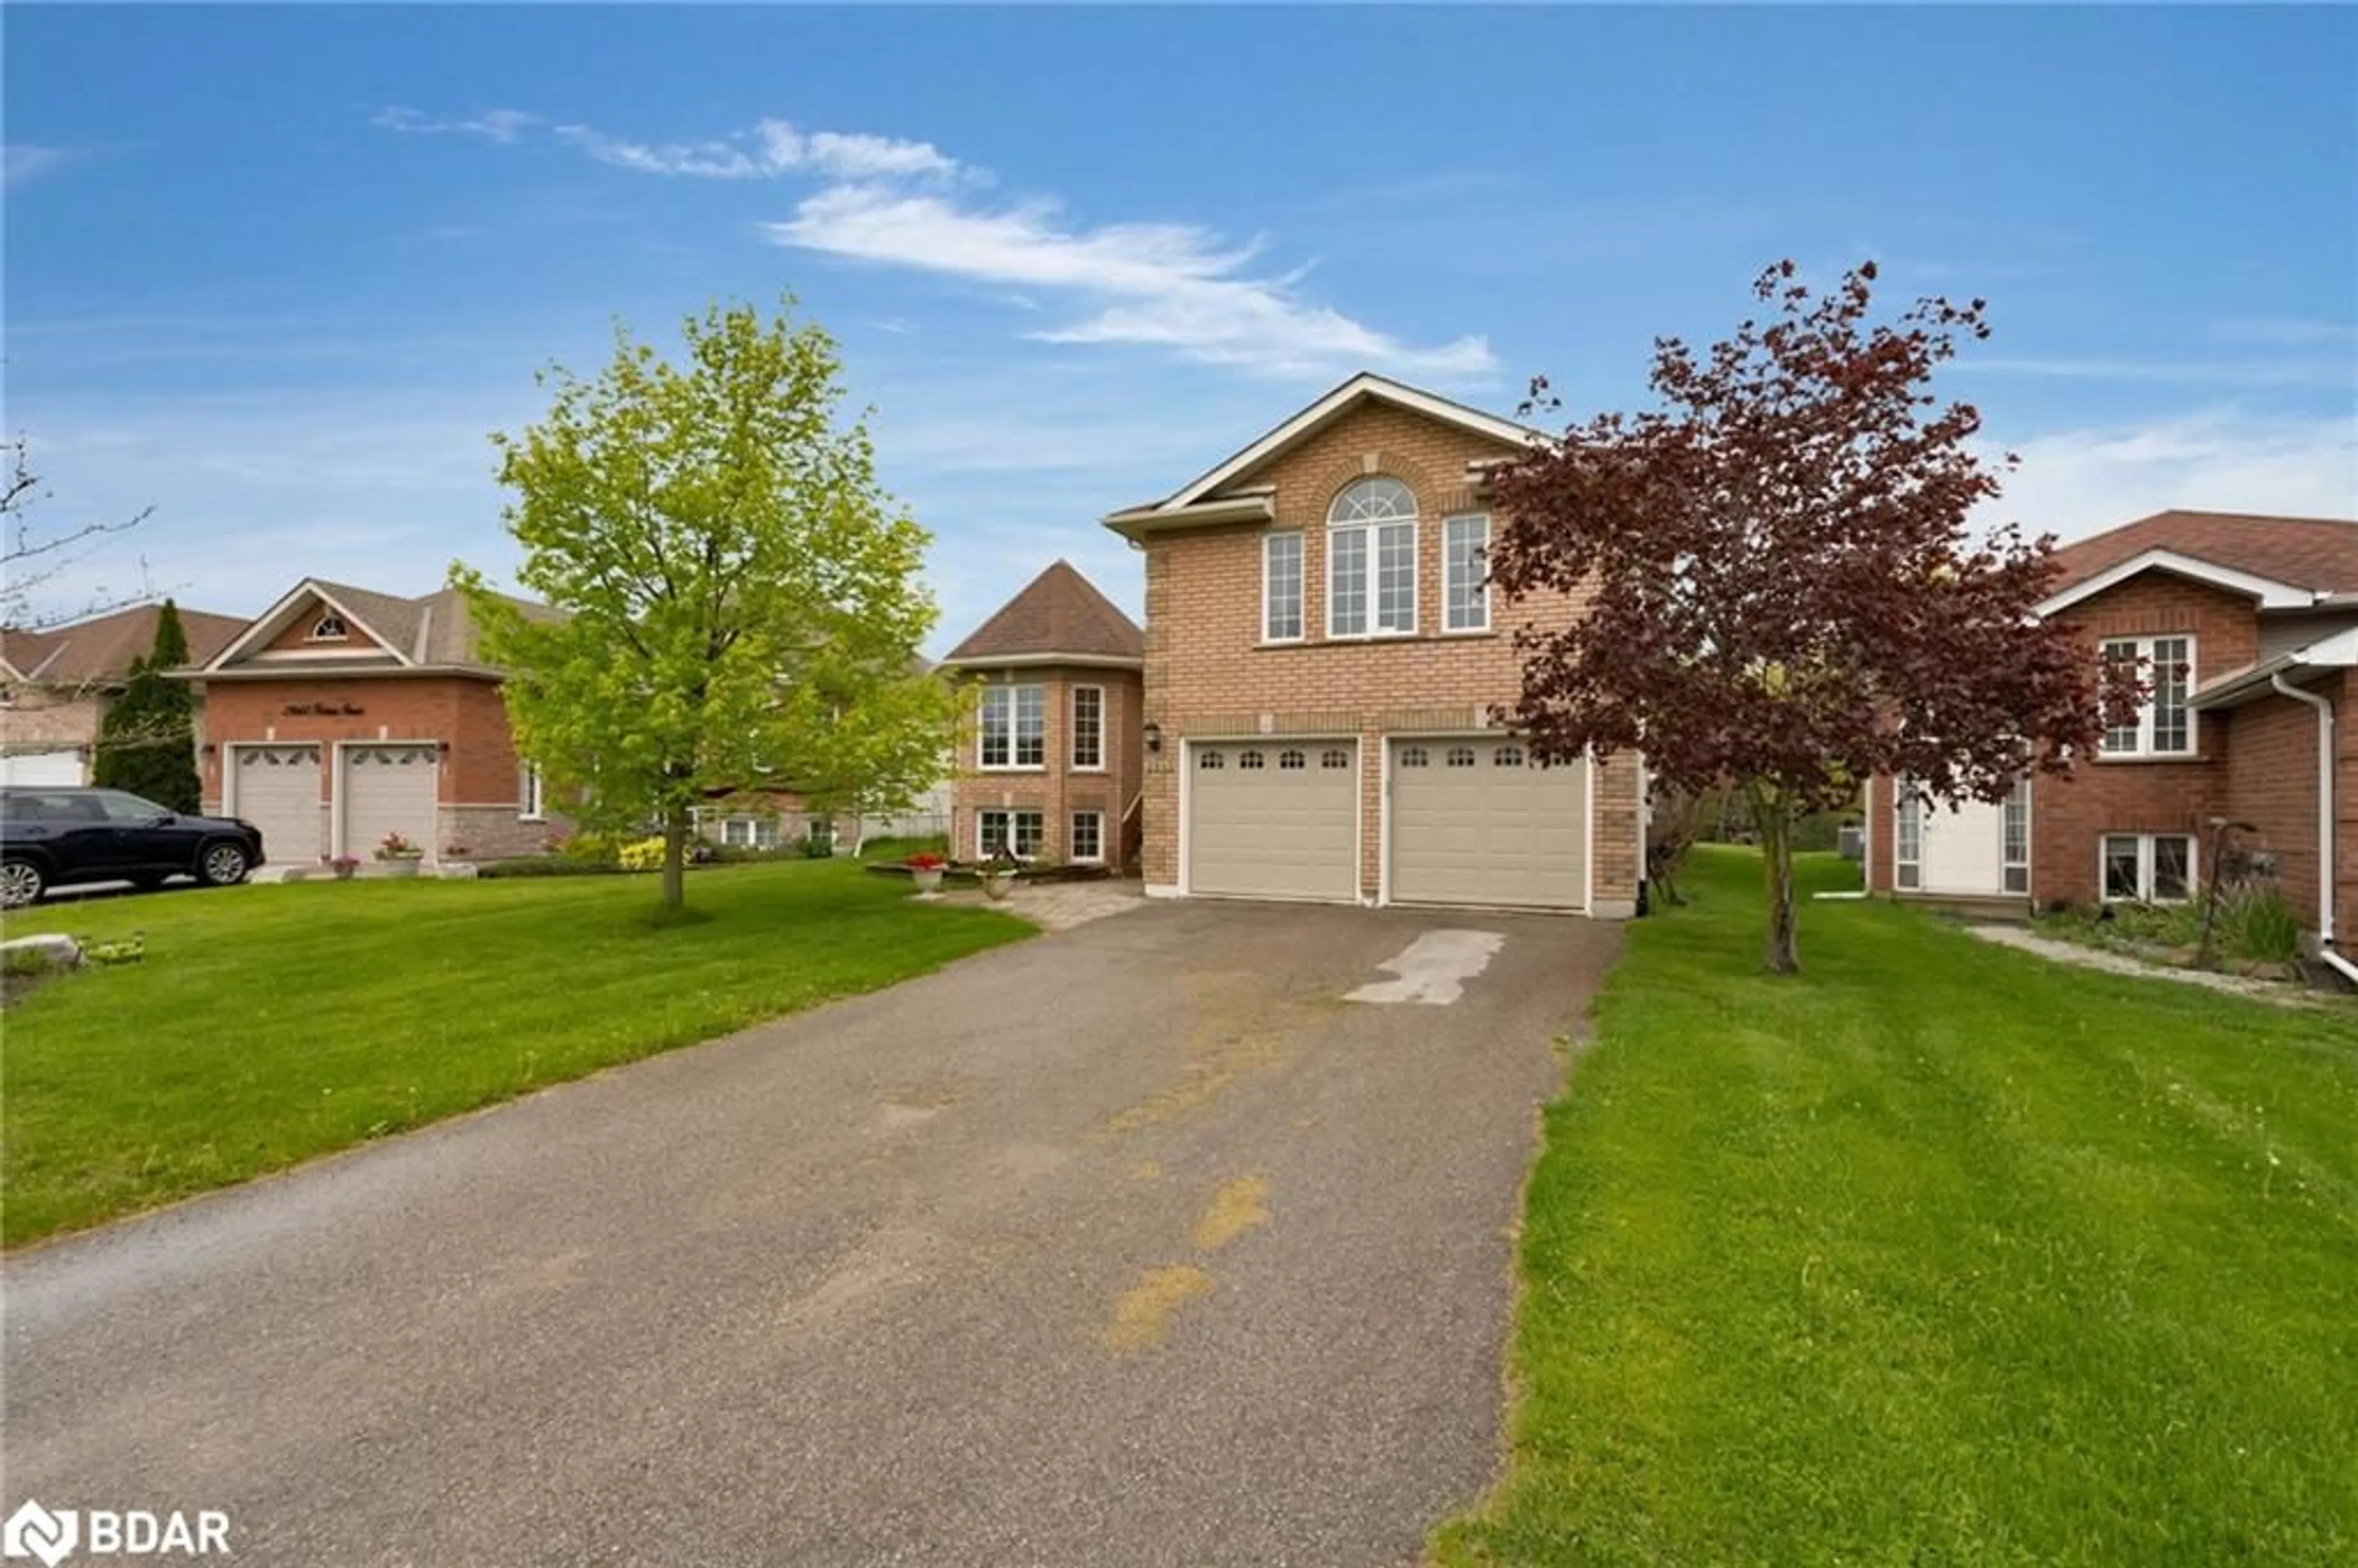 Frontside or backside of a home for 2845 Ireton St, Innisfil Ontario L9S 2J3